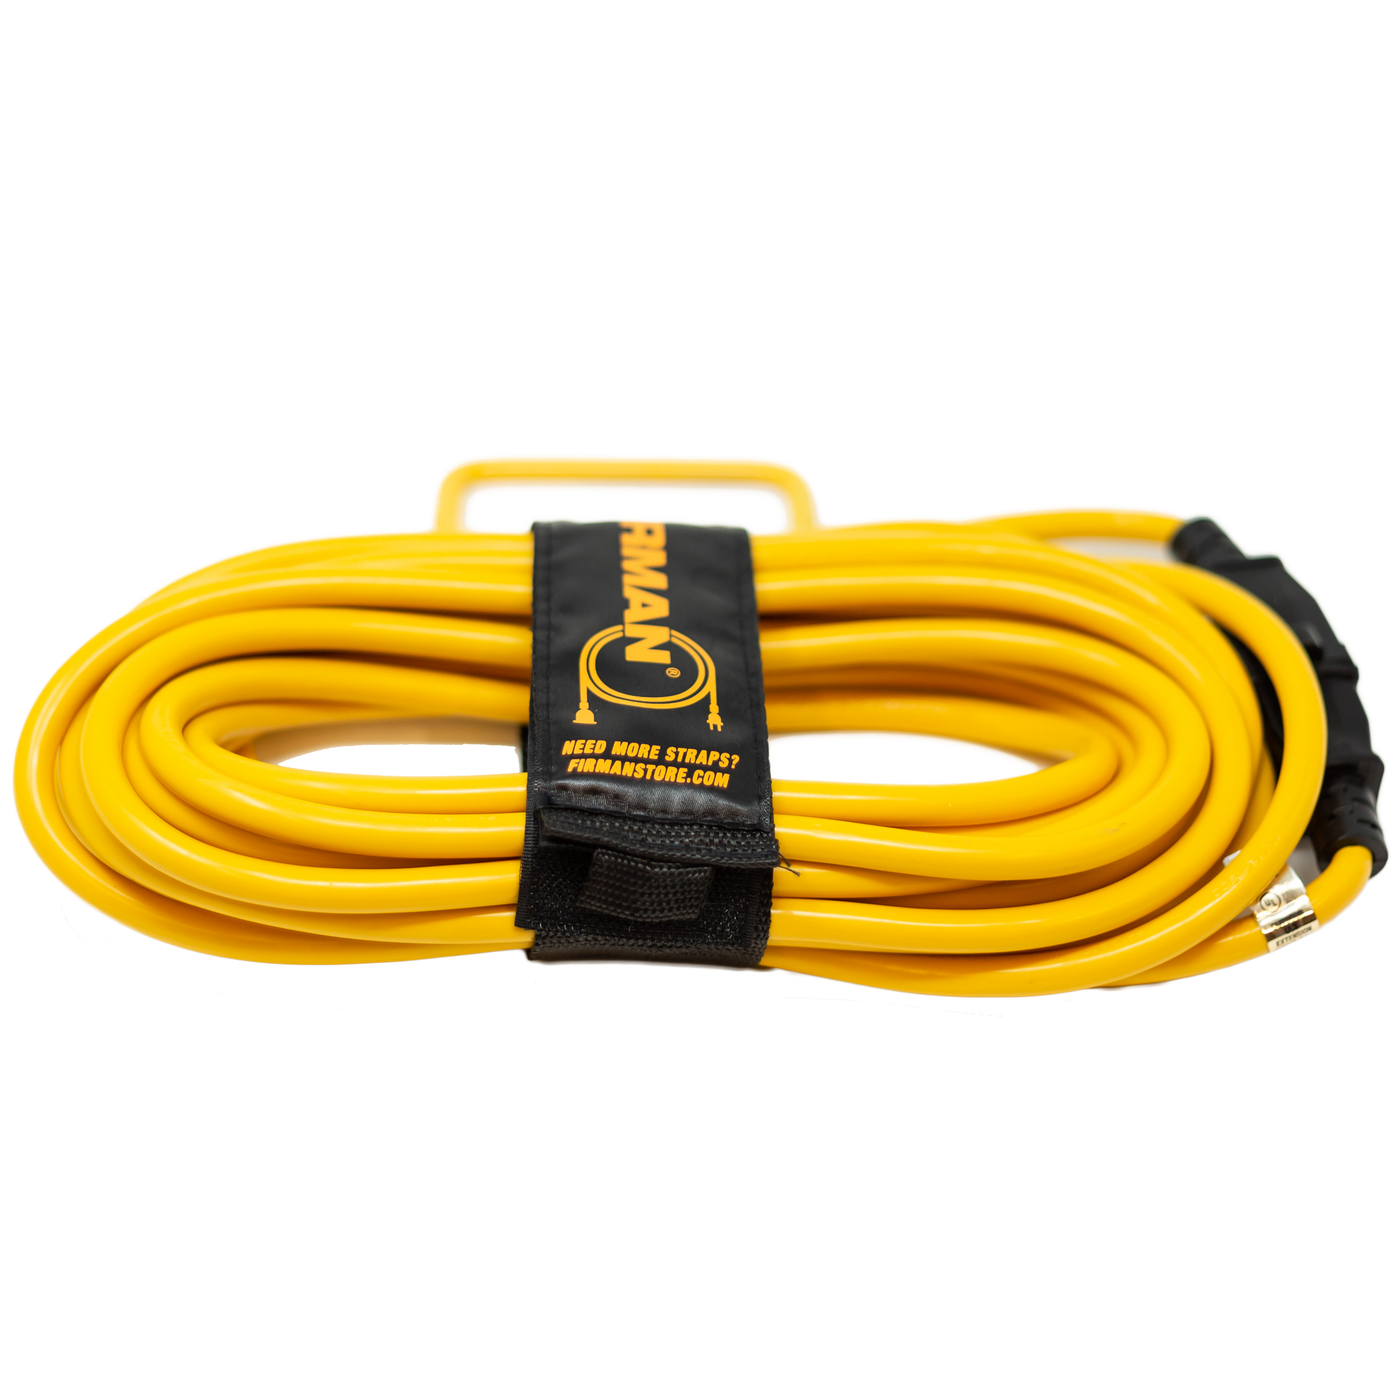 Retractable Extension Cord Reel – FIRMAN Power Equipment, extension cord